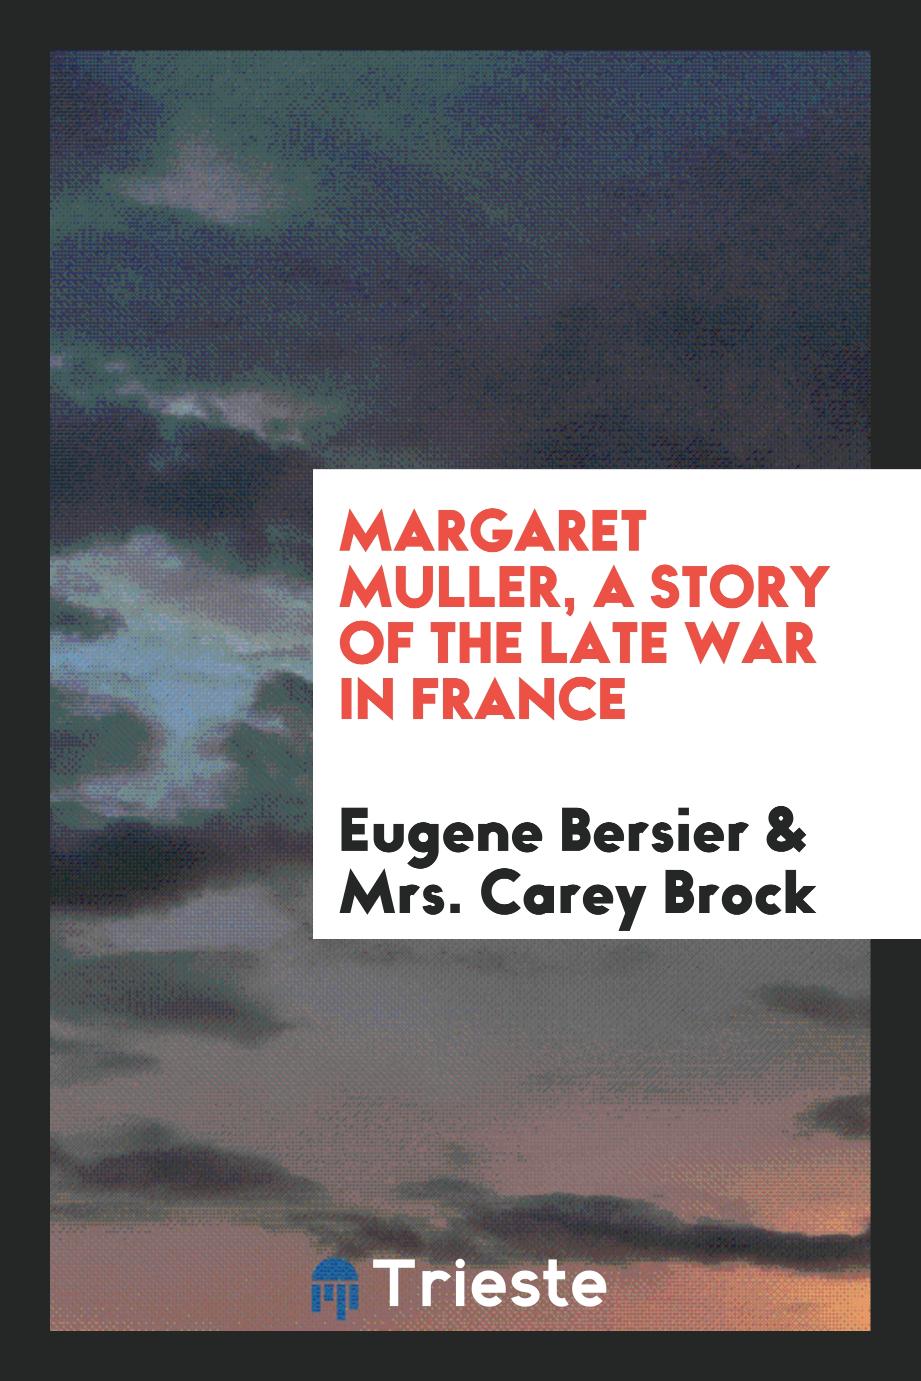 Margaret Muller, a Story of the Late War in France